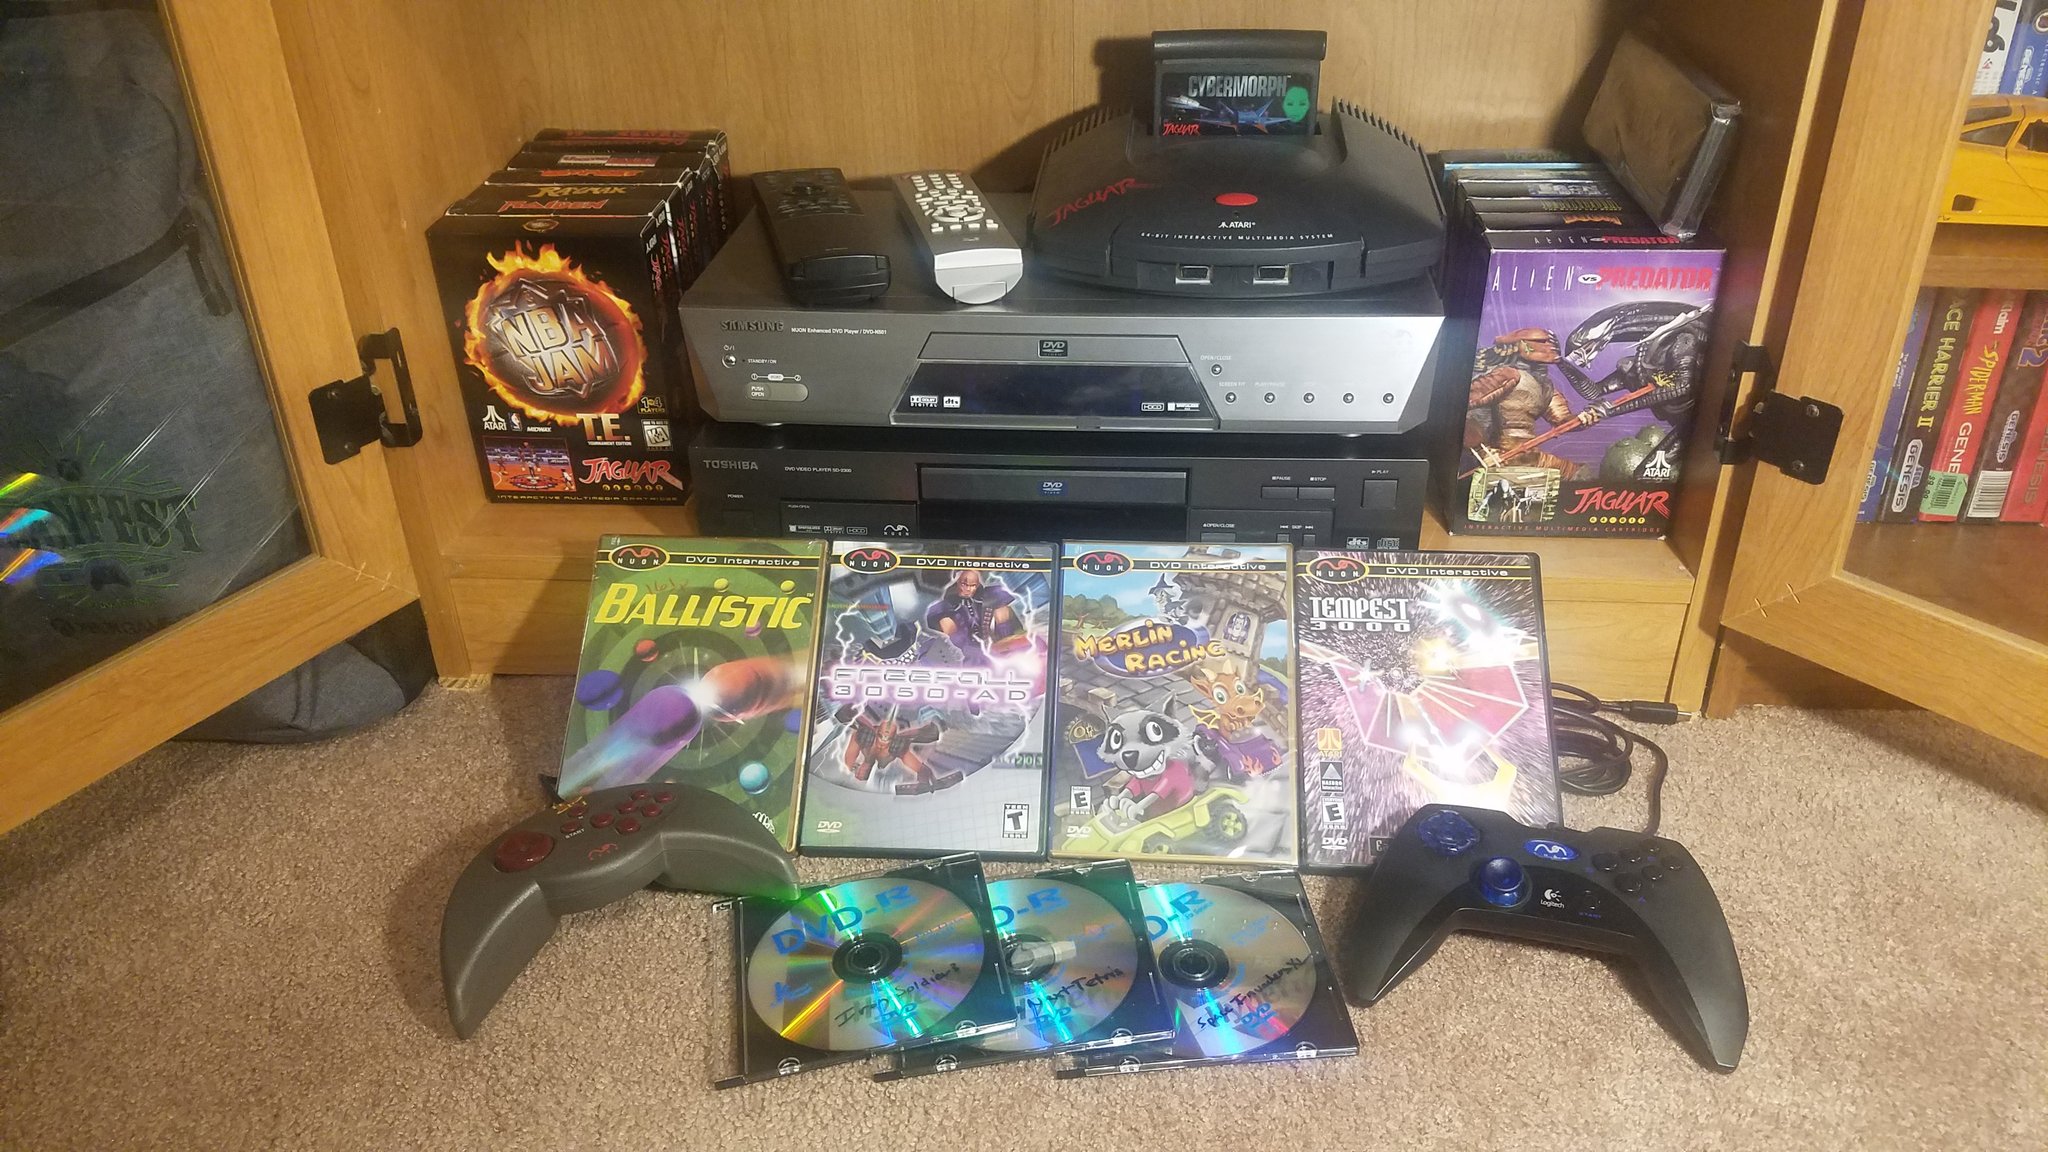 xsuicidesn0wmanx on Twitter: "I've seen people talking about the #Nuon  lately and thought it'd be a great time to share this old pic of my Nuon  collection. If you ever get the